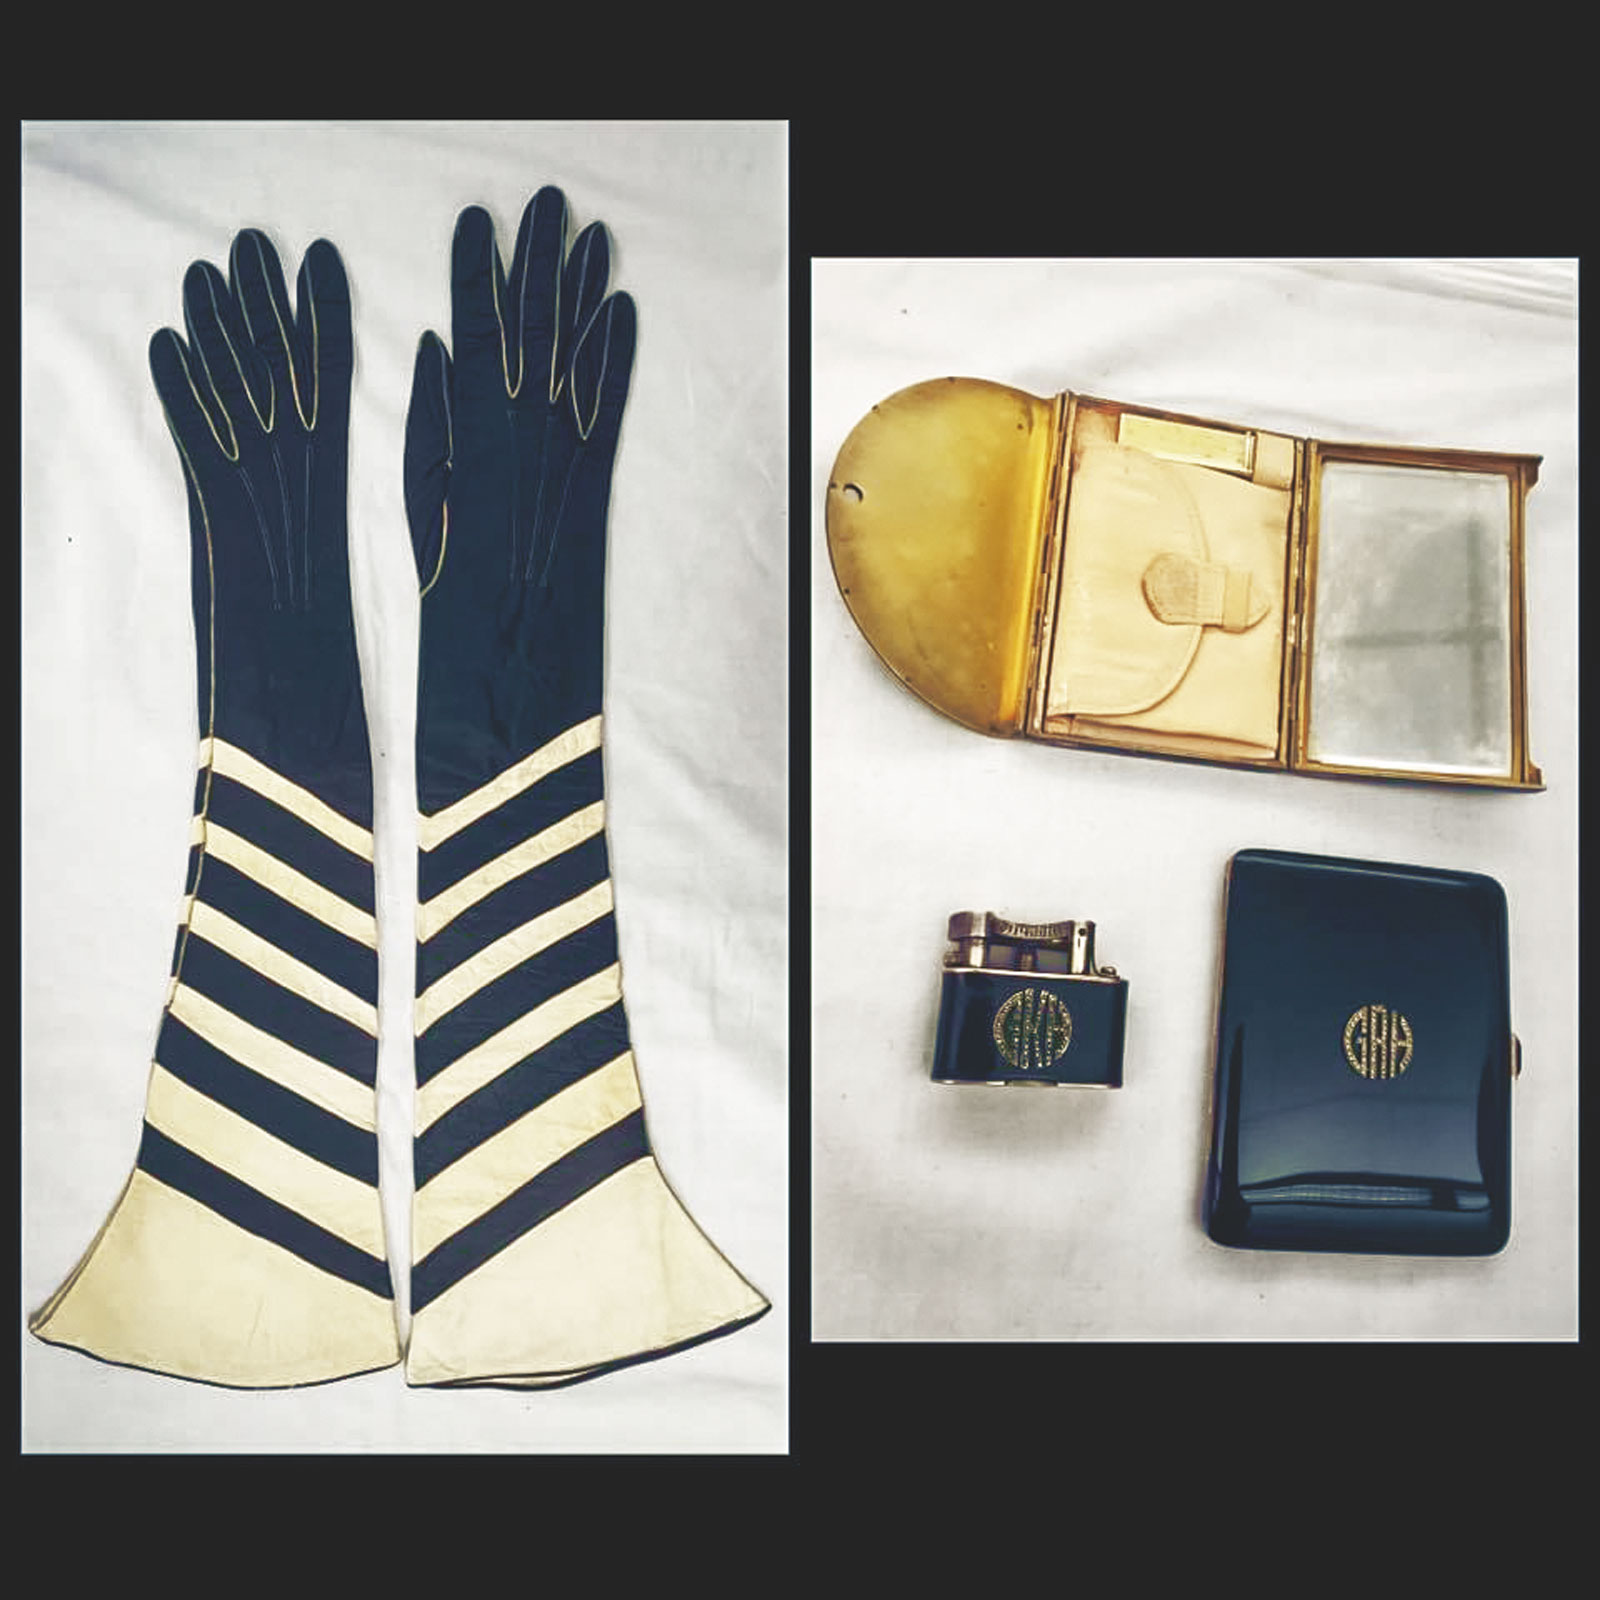 Black-and-white leather gloves, gold cigarette case, black metal cigarette lighter, and black makeup case.